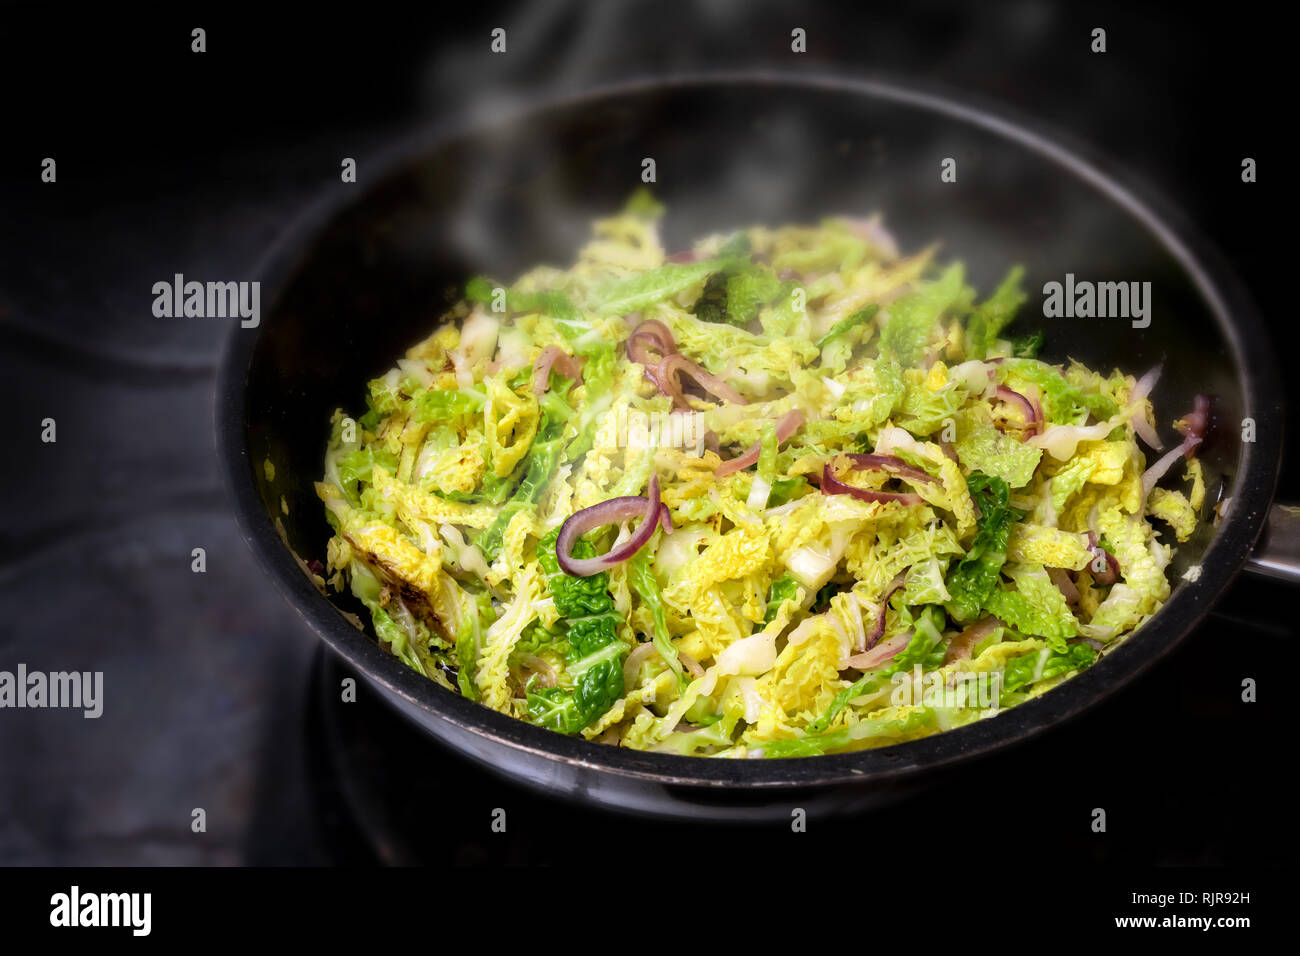 cooking green savoy cabbage with red onions in a black pan on a stove, healthy winter vegetable, selected focus, narrow depth of field Stock Photo